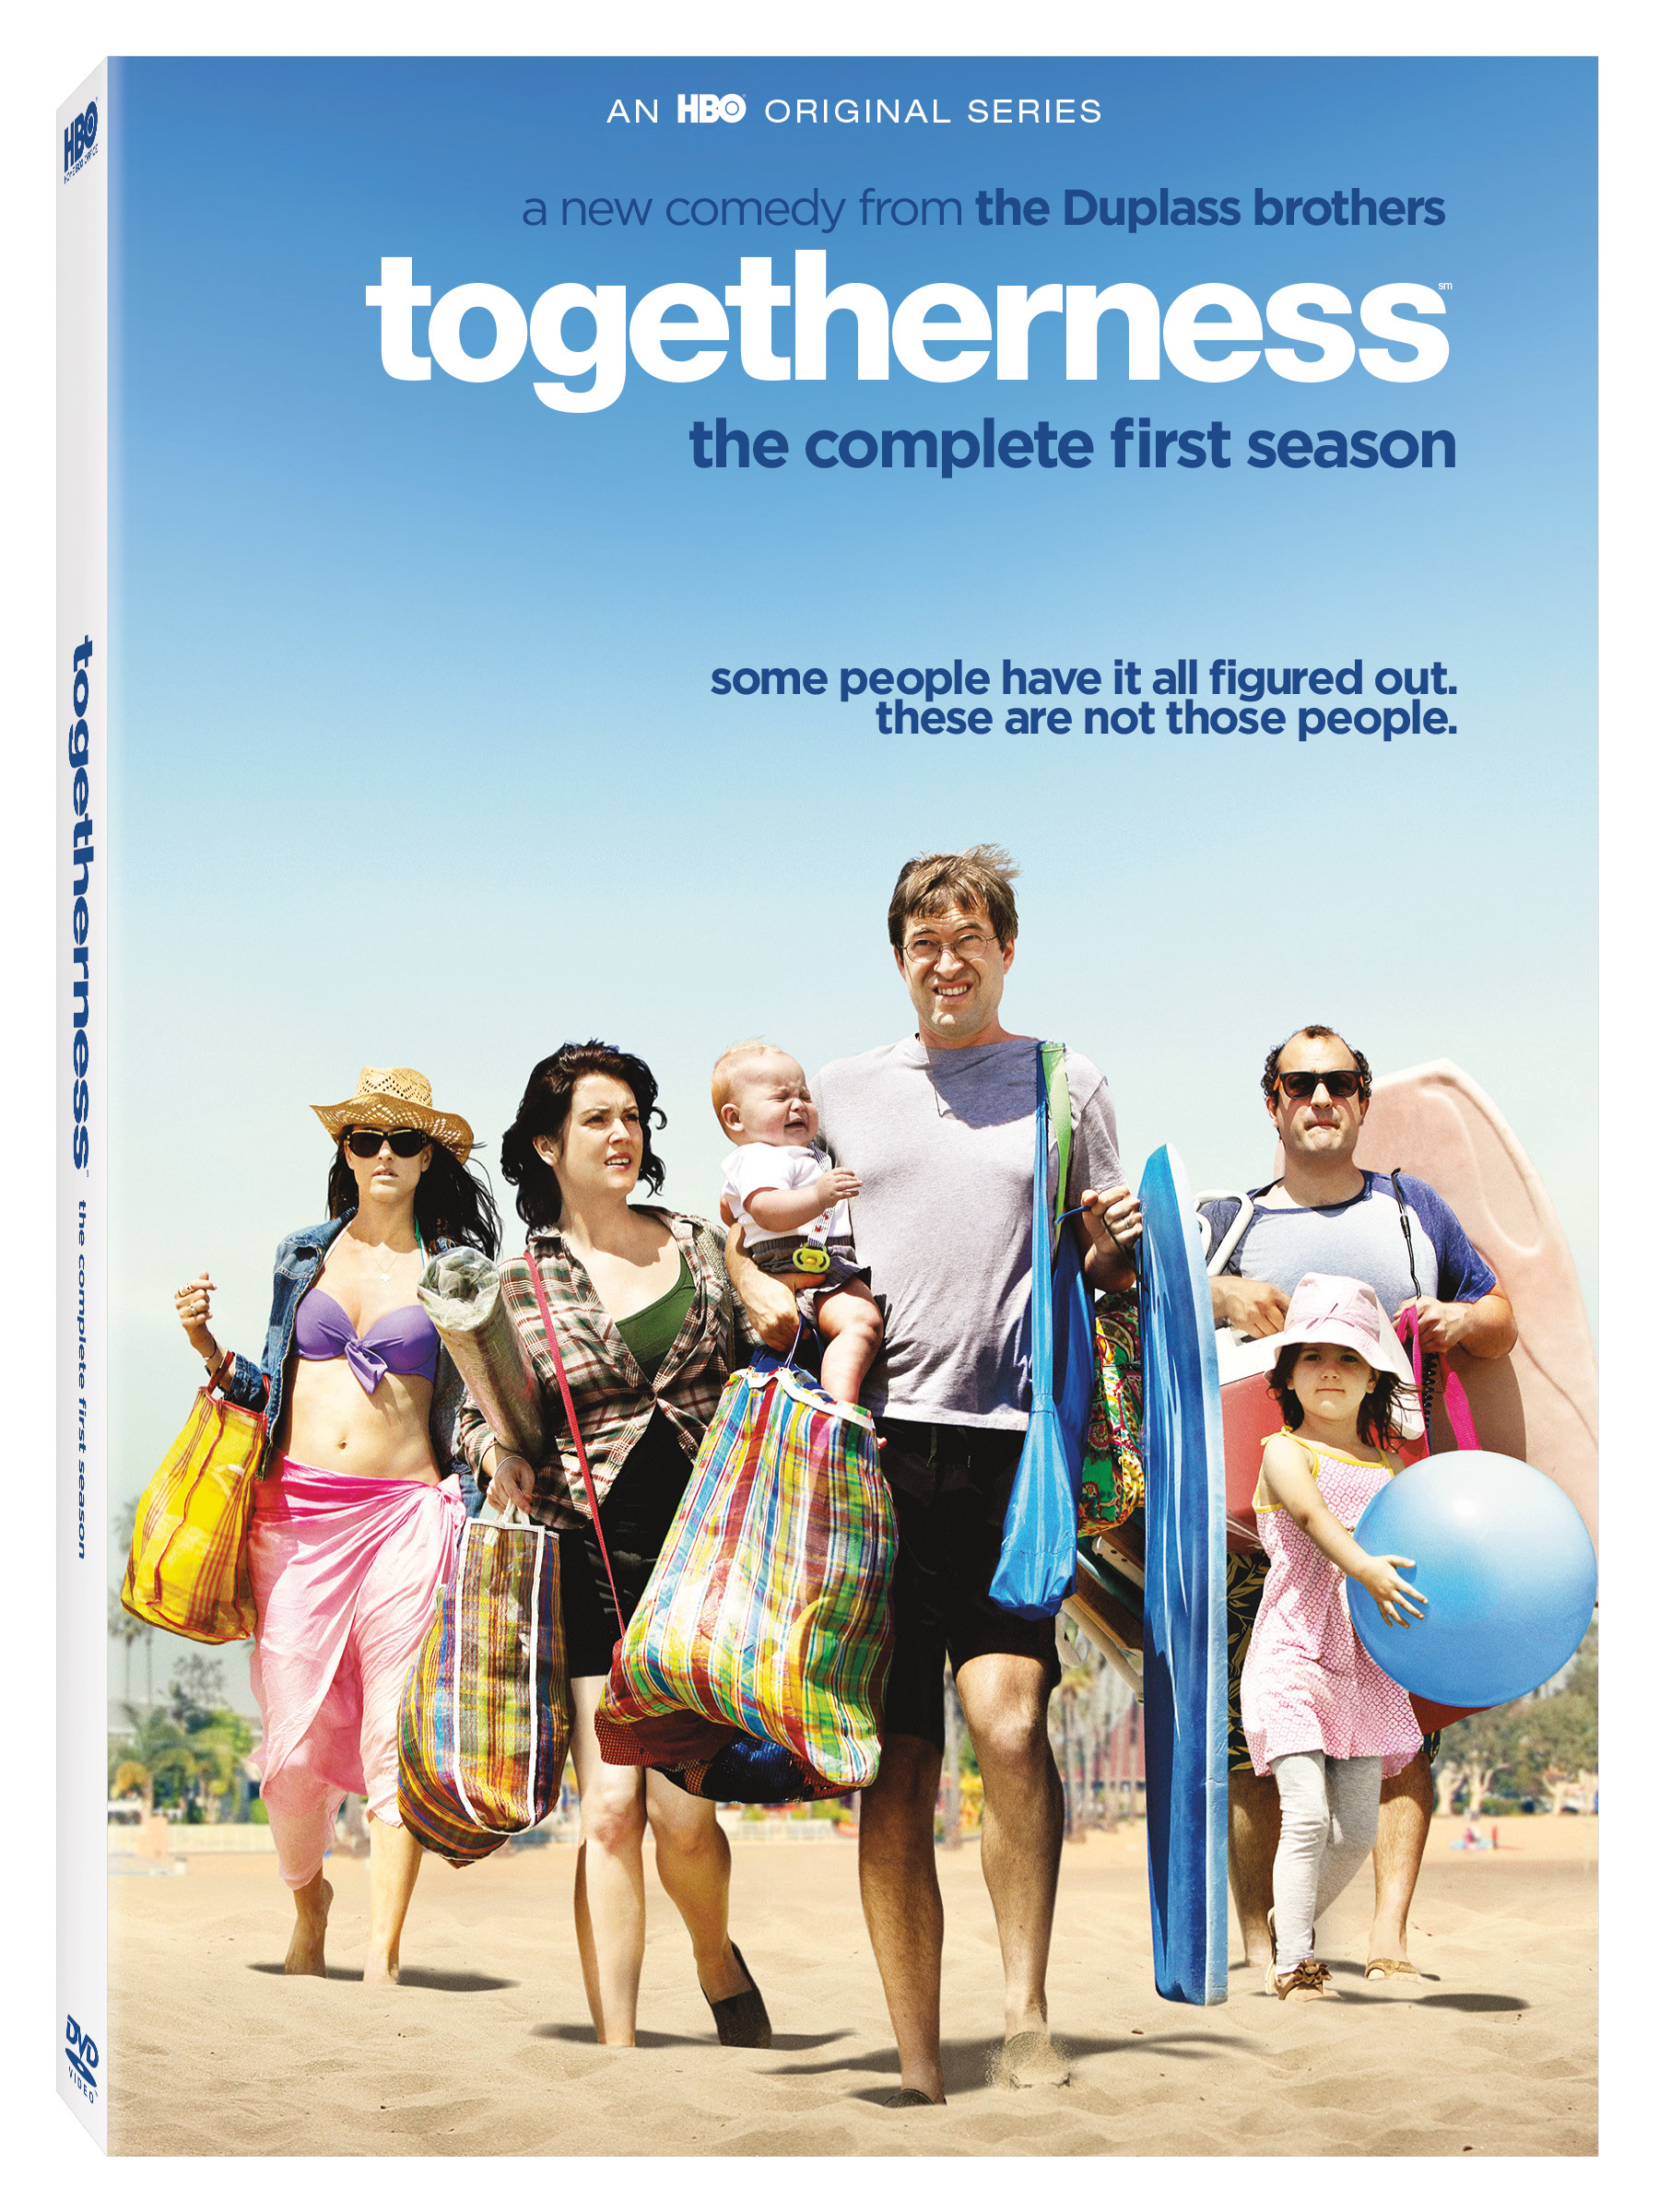 Togetherness Season 1 Release Date Announced For Blu-ray/DVD